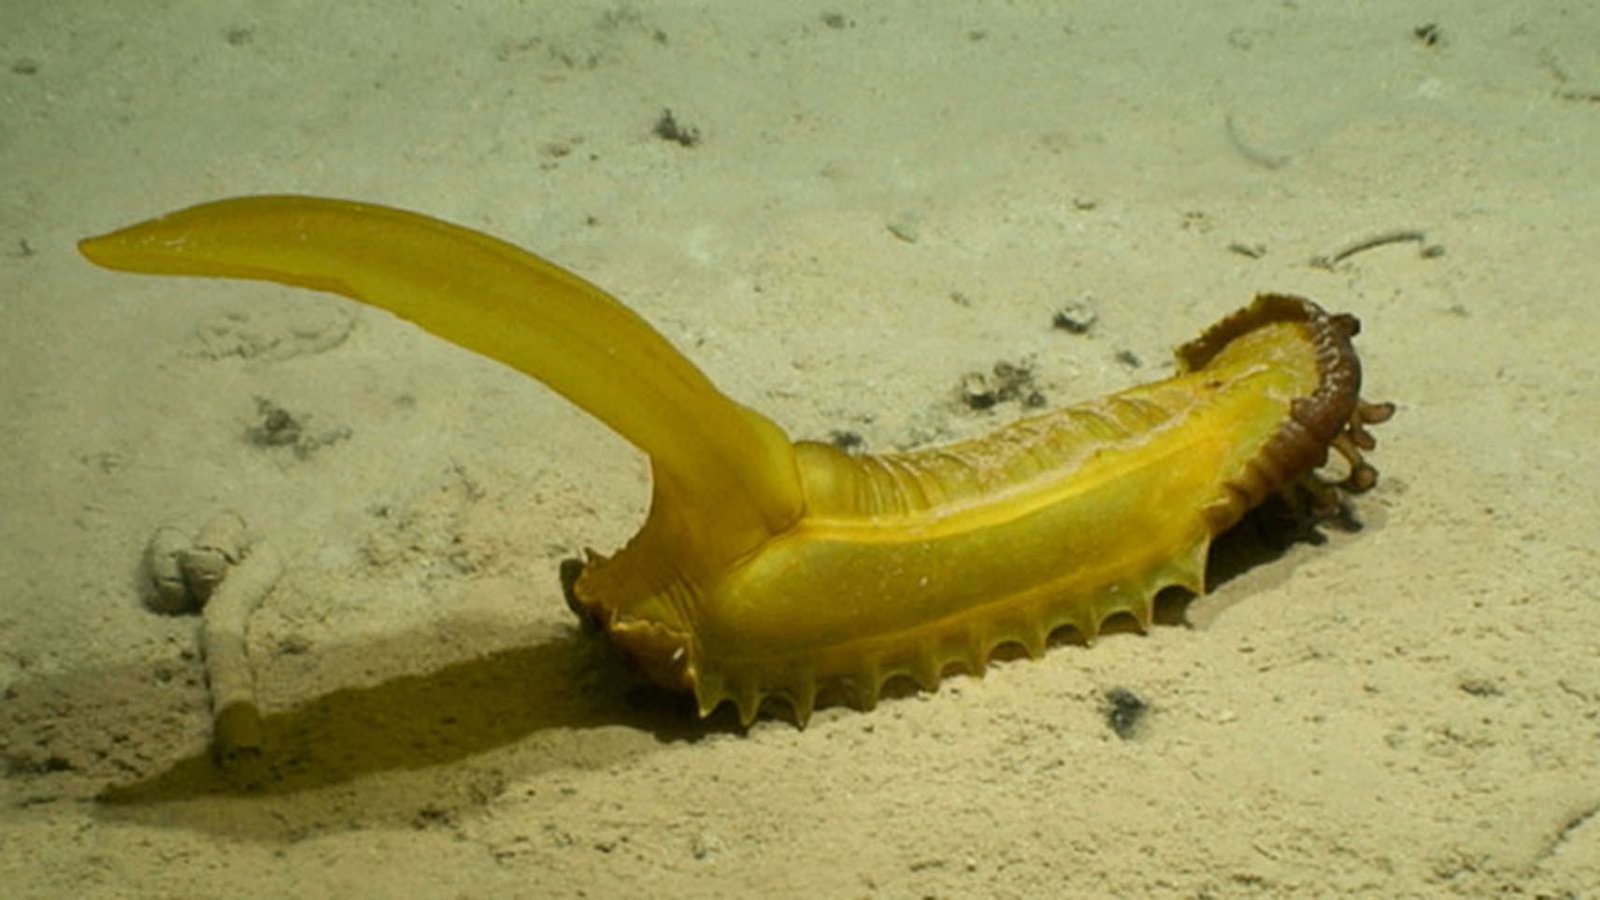 39 potential new species discovered in the sea